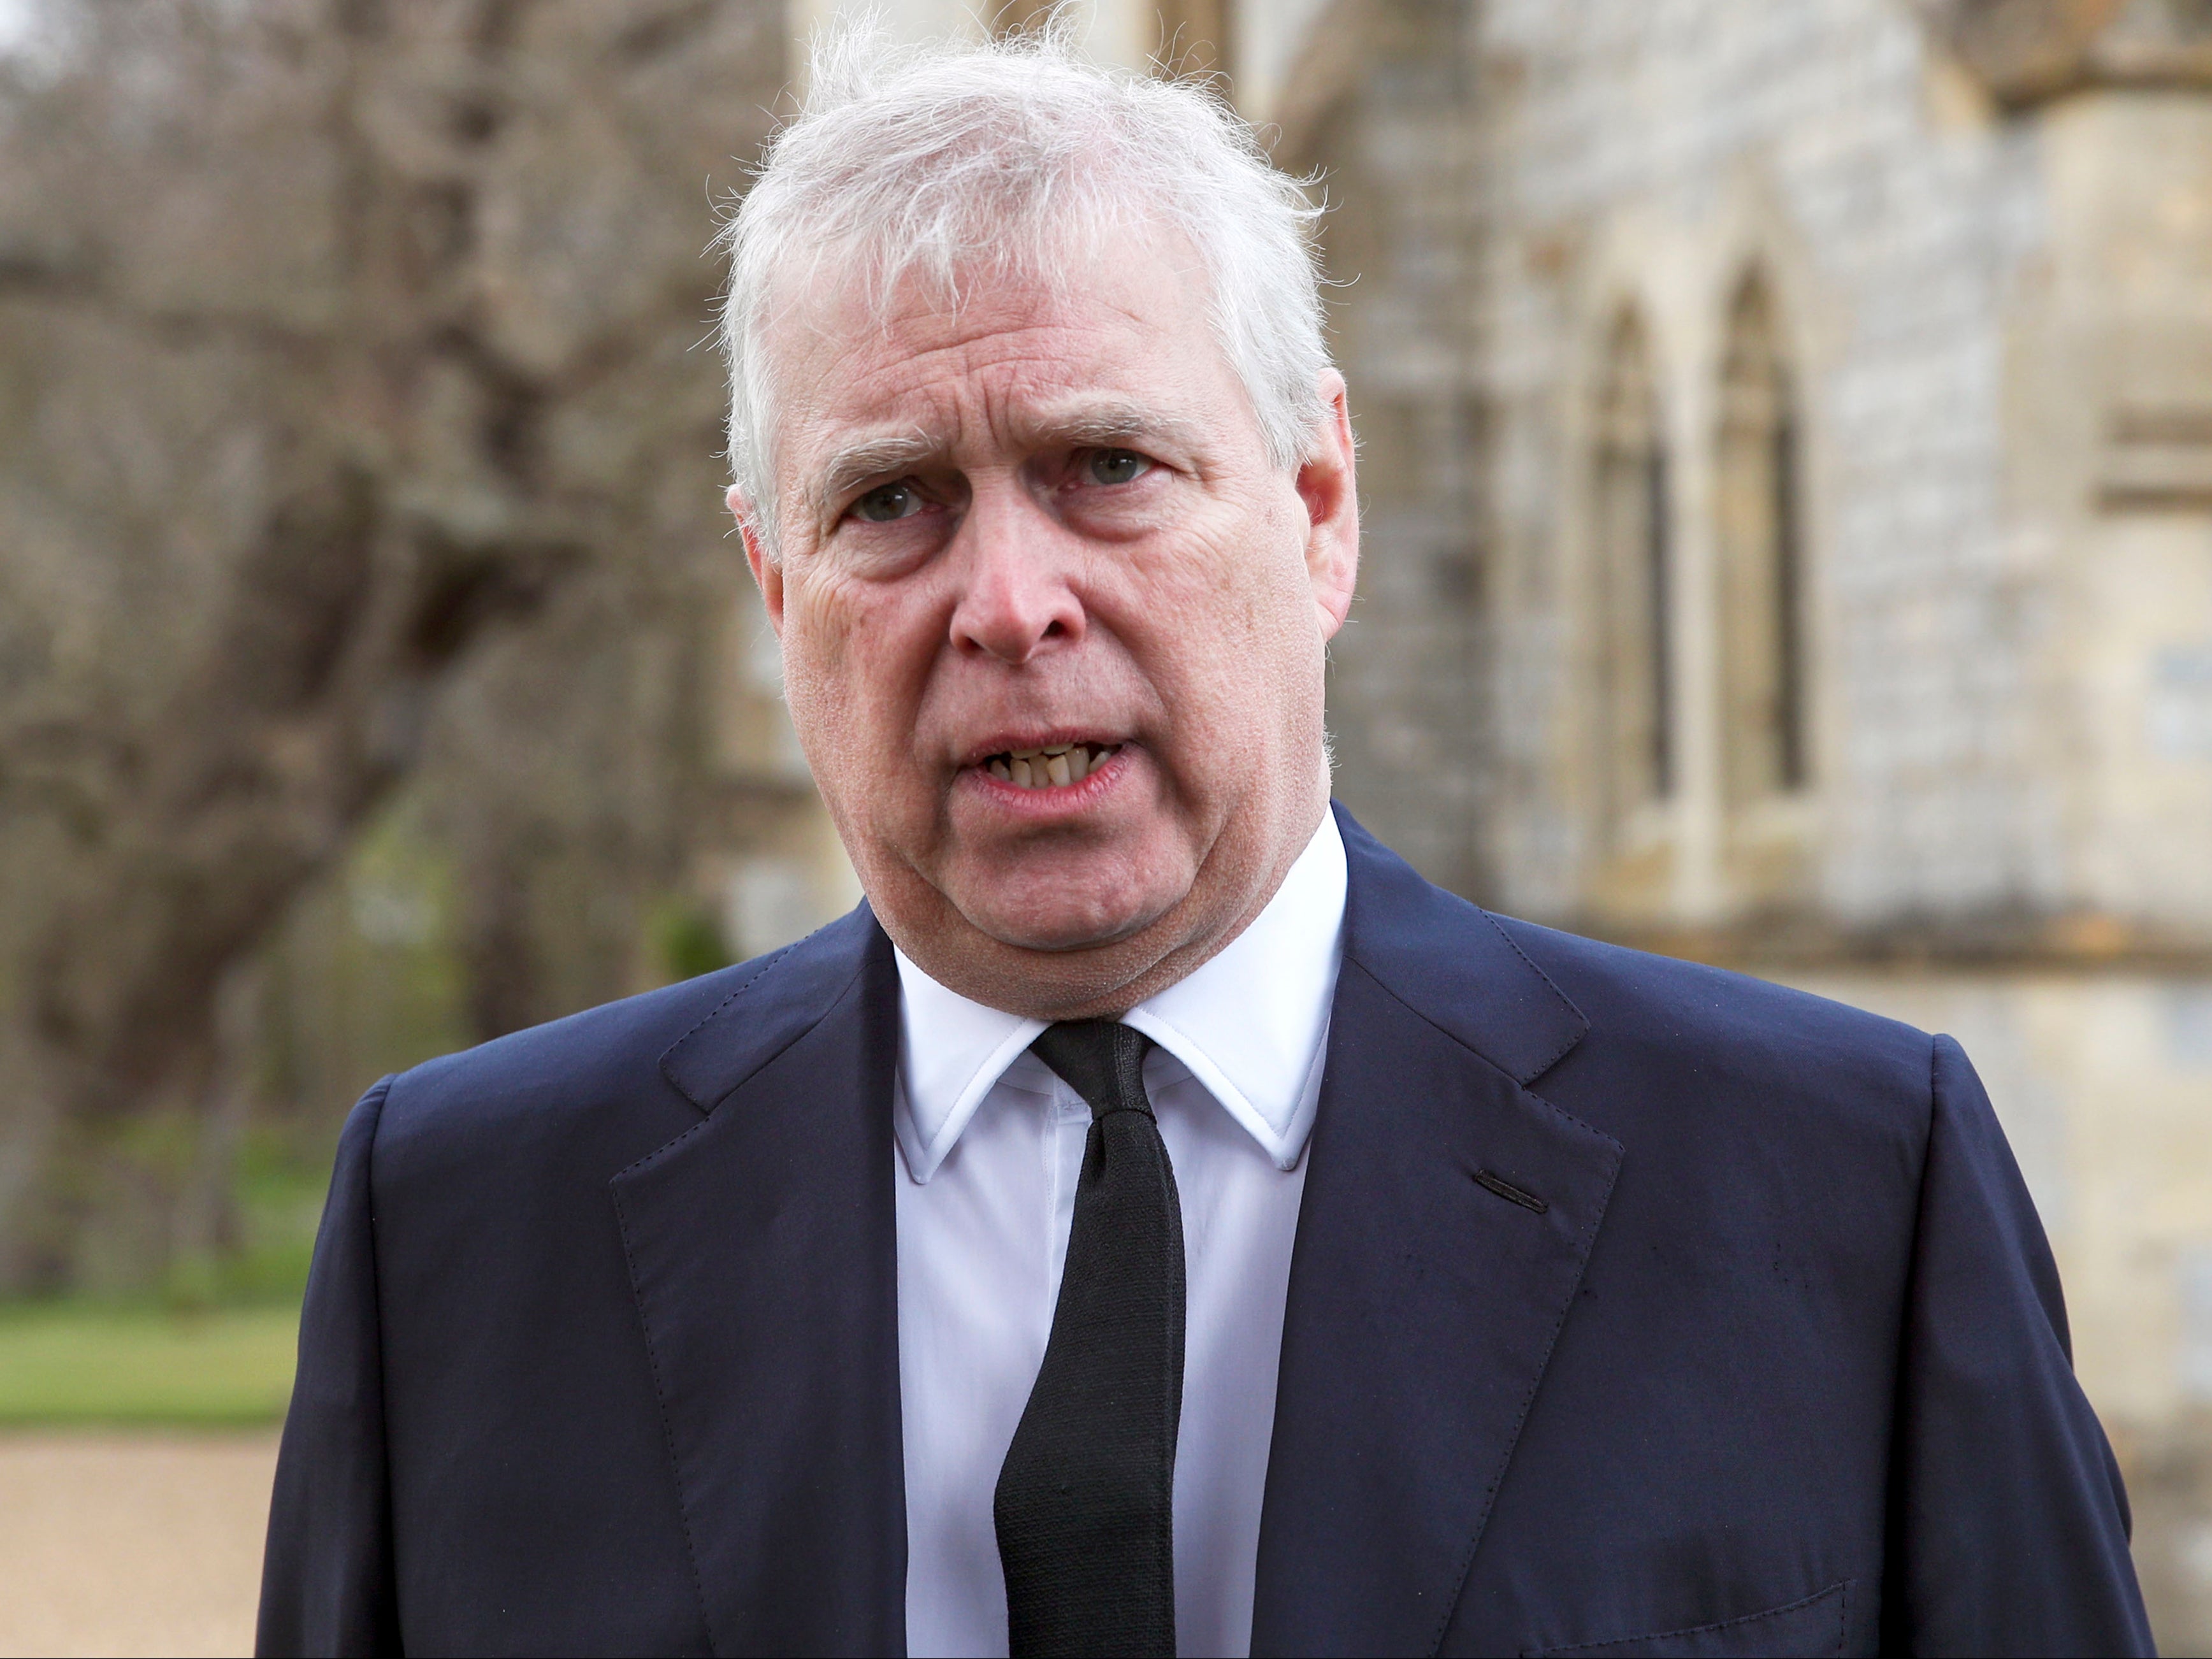 Victims are urging Prince Andrew to talk to the FBI, more than two years after he promised to cooperate